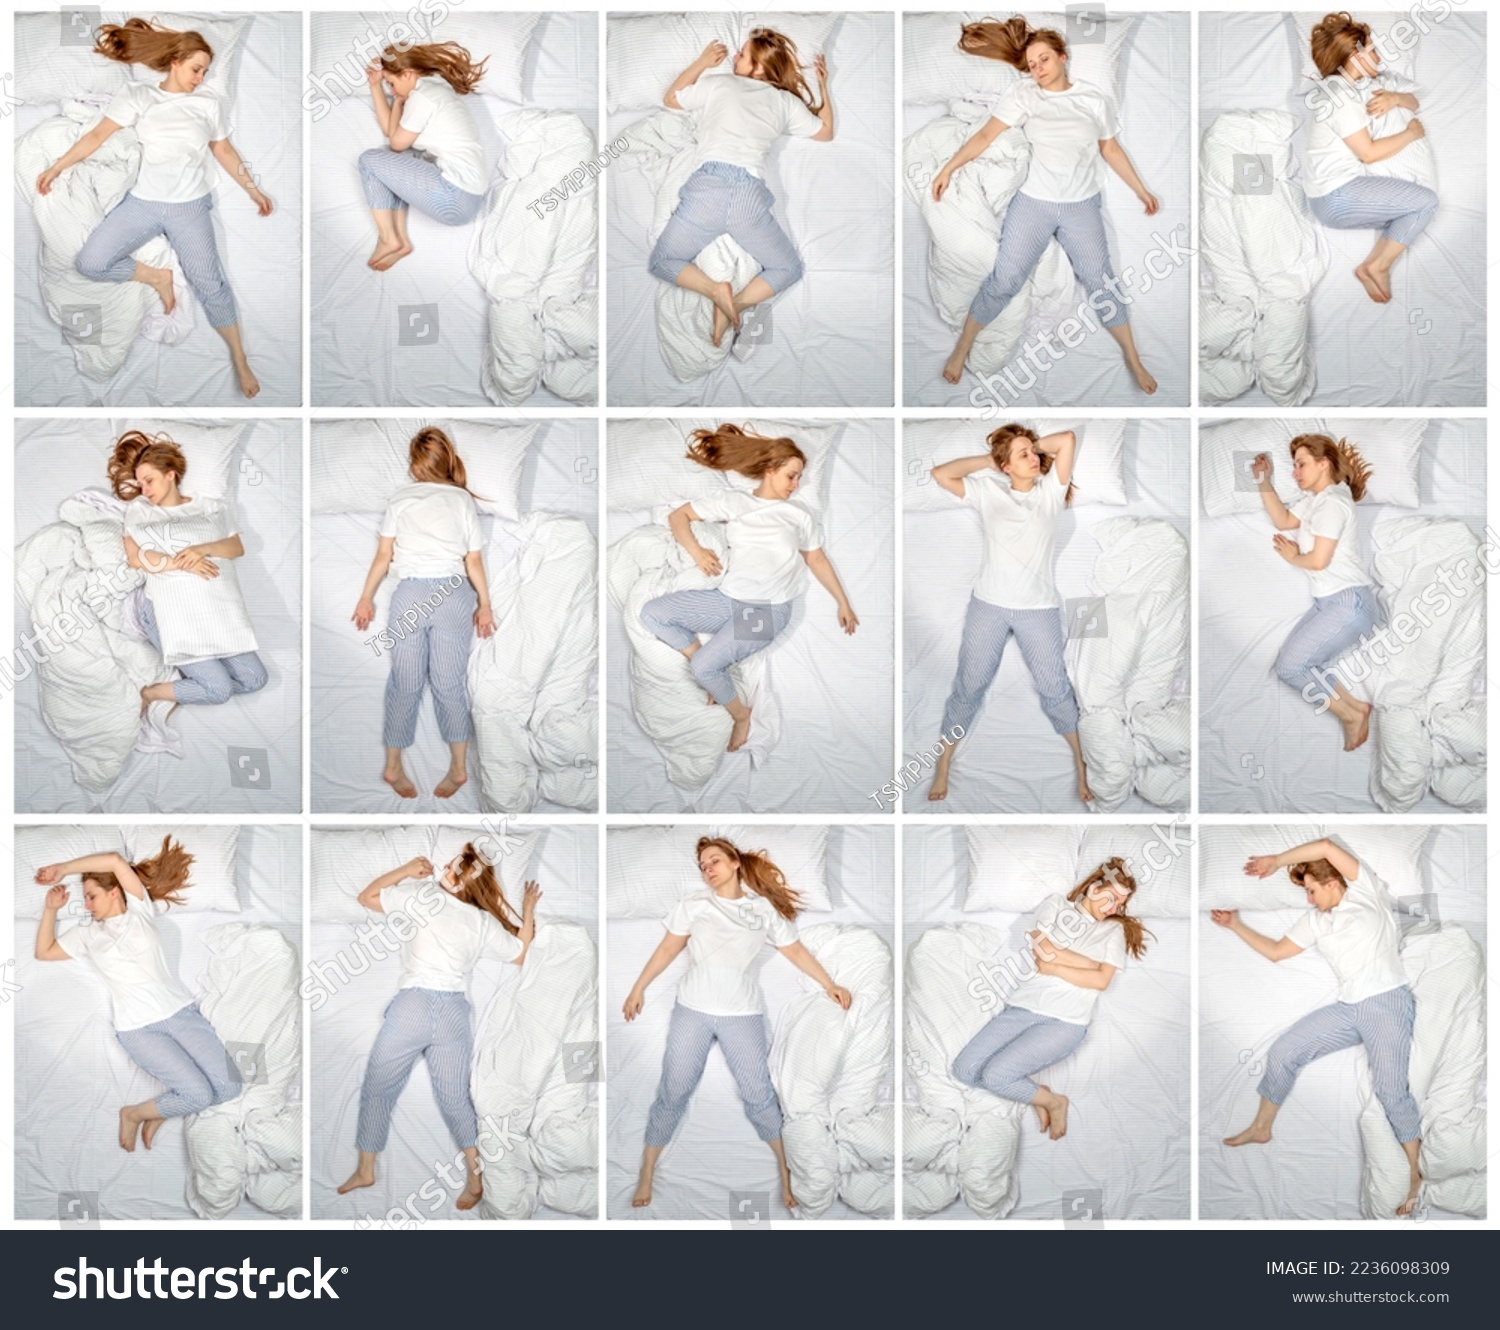 Various poses of a sleeping woman. Female side sleeper fetal position, on the back, on her side, face down on stomach in bed. Deep restful sleep. Girl lying in a nightie pajamas on white bed linen. #2236098309